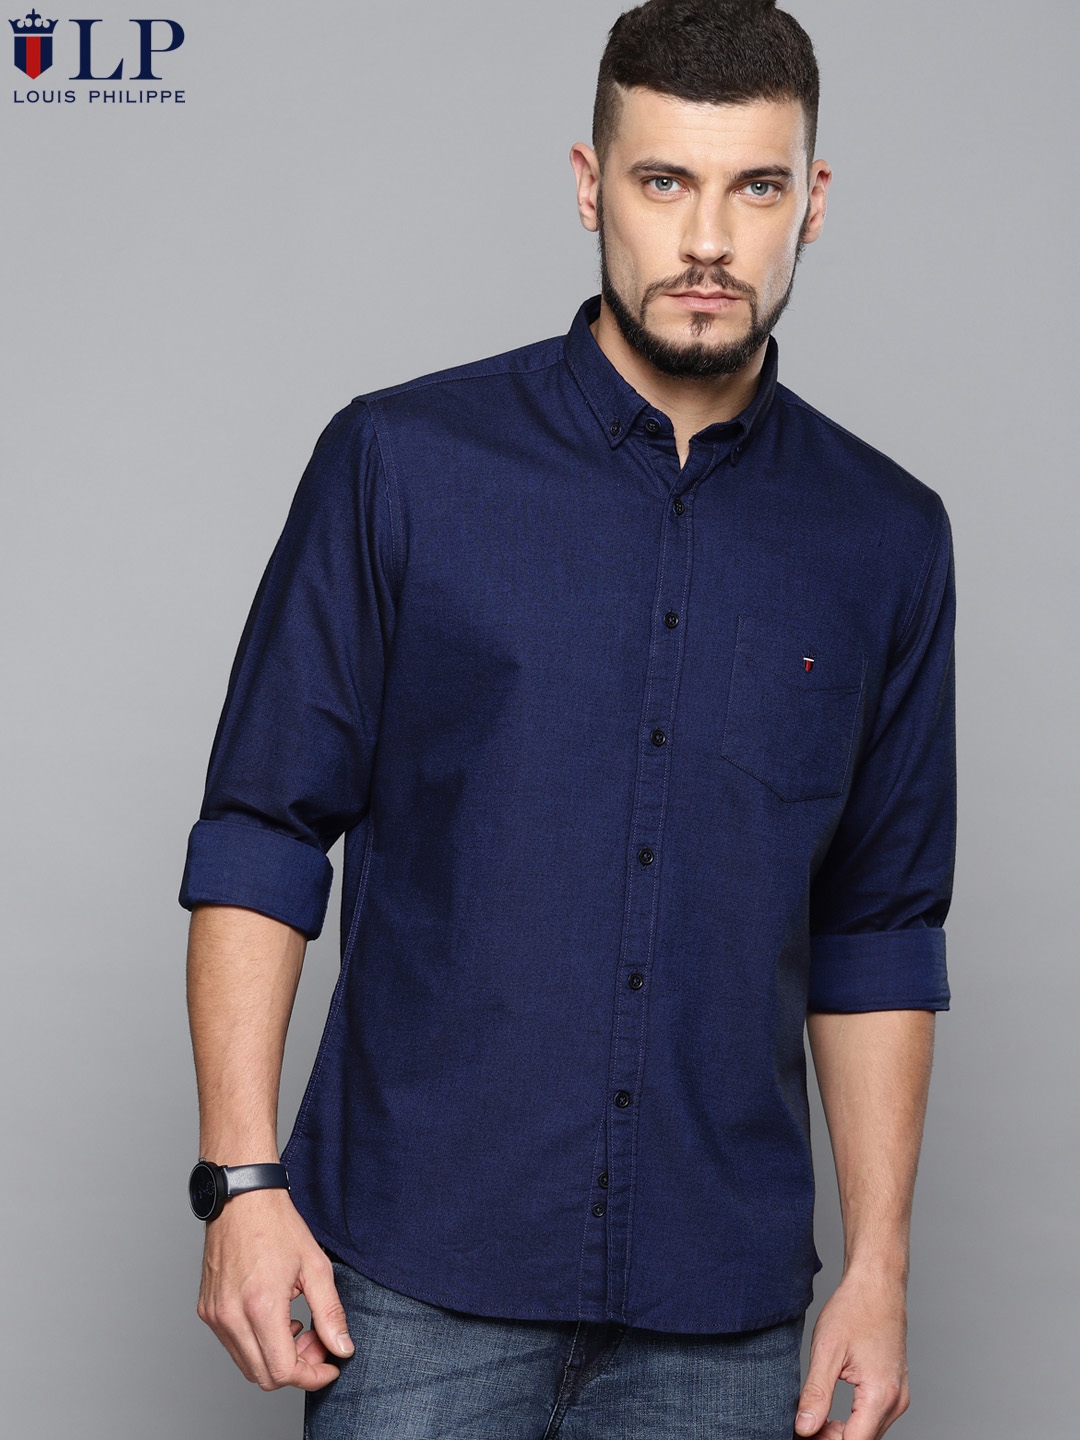 Buy Louis Philippe Sport Men Navy Blue Slim Fit Solid Casual Shirt - Shirts  for Men 9982873